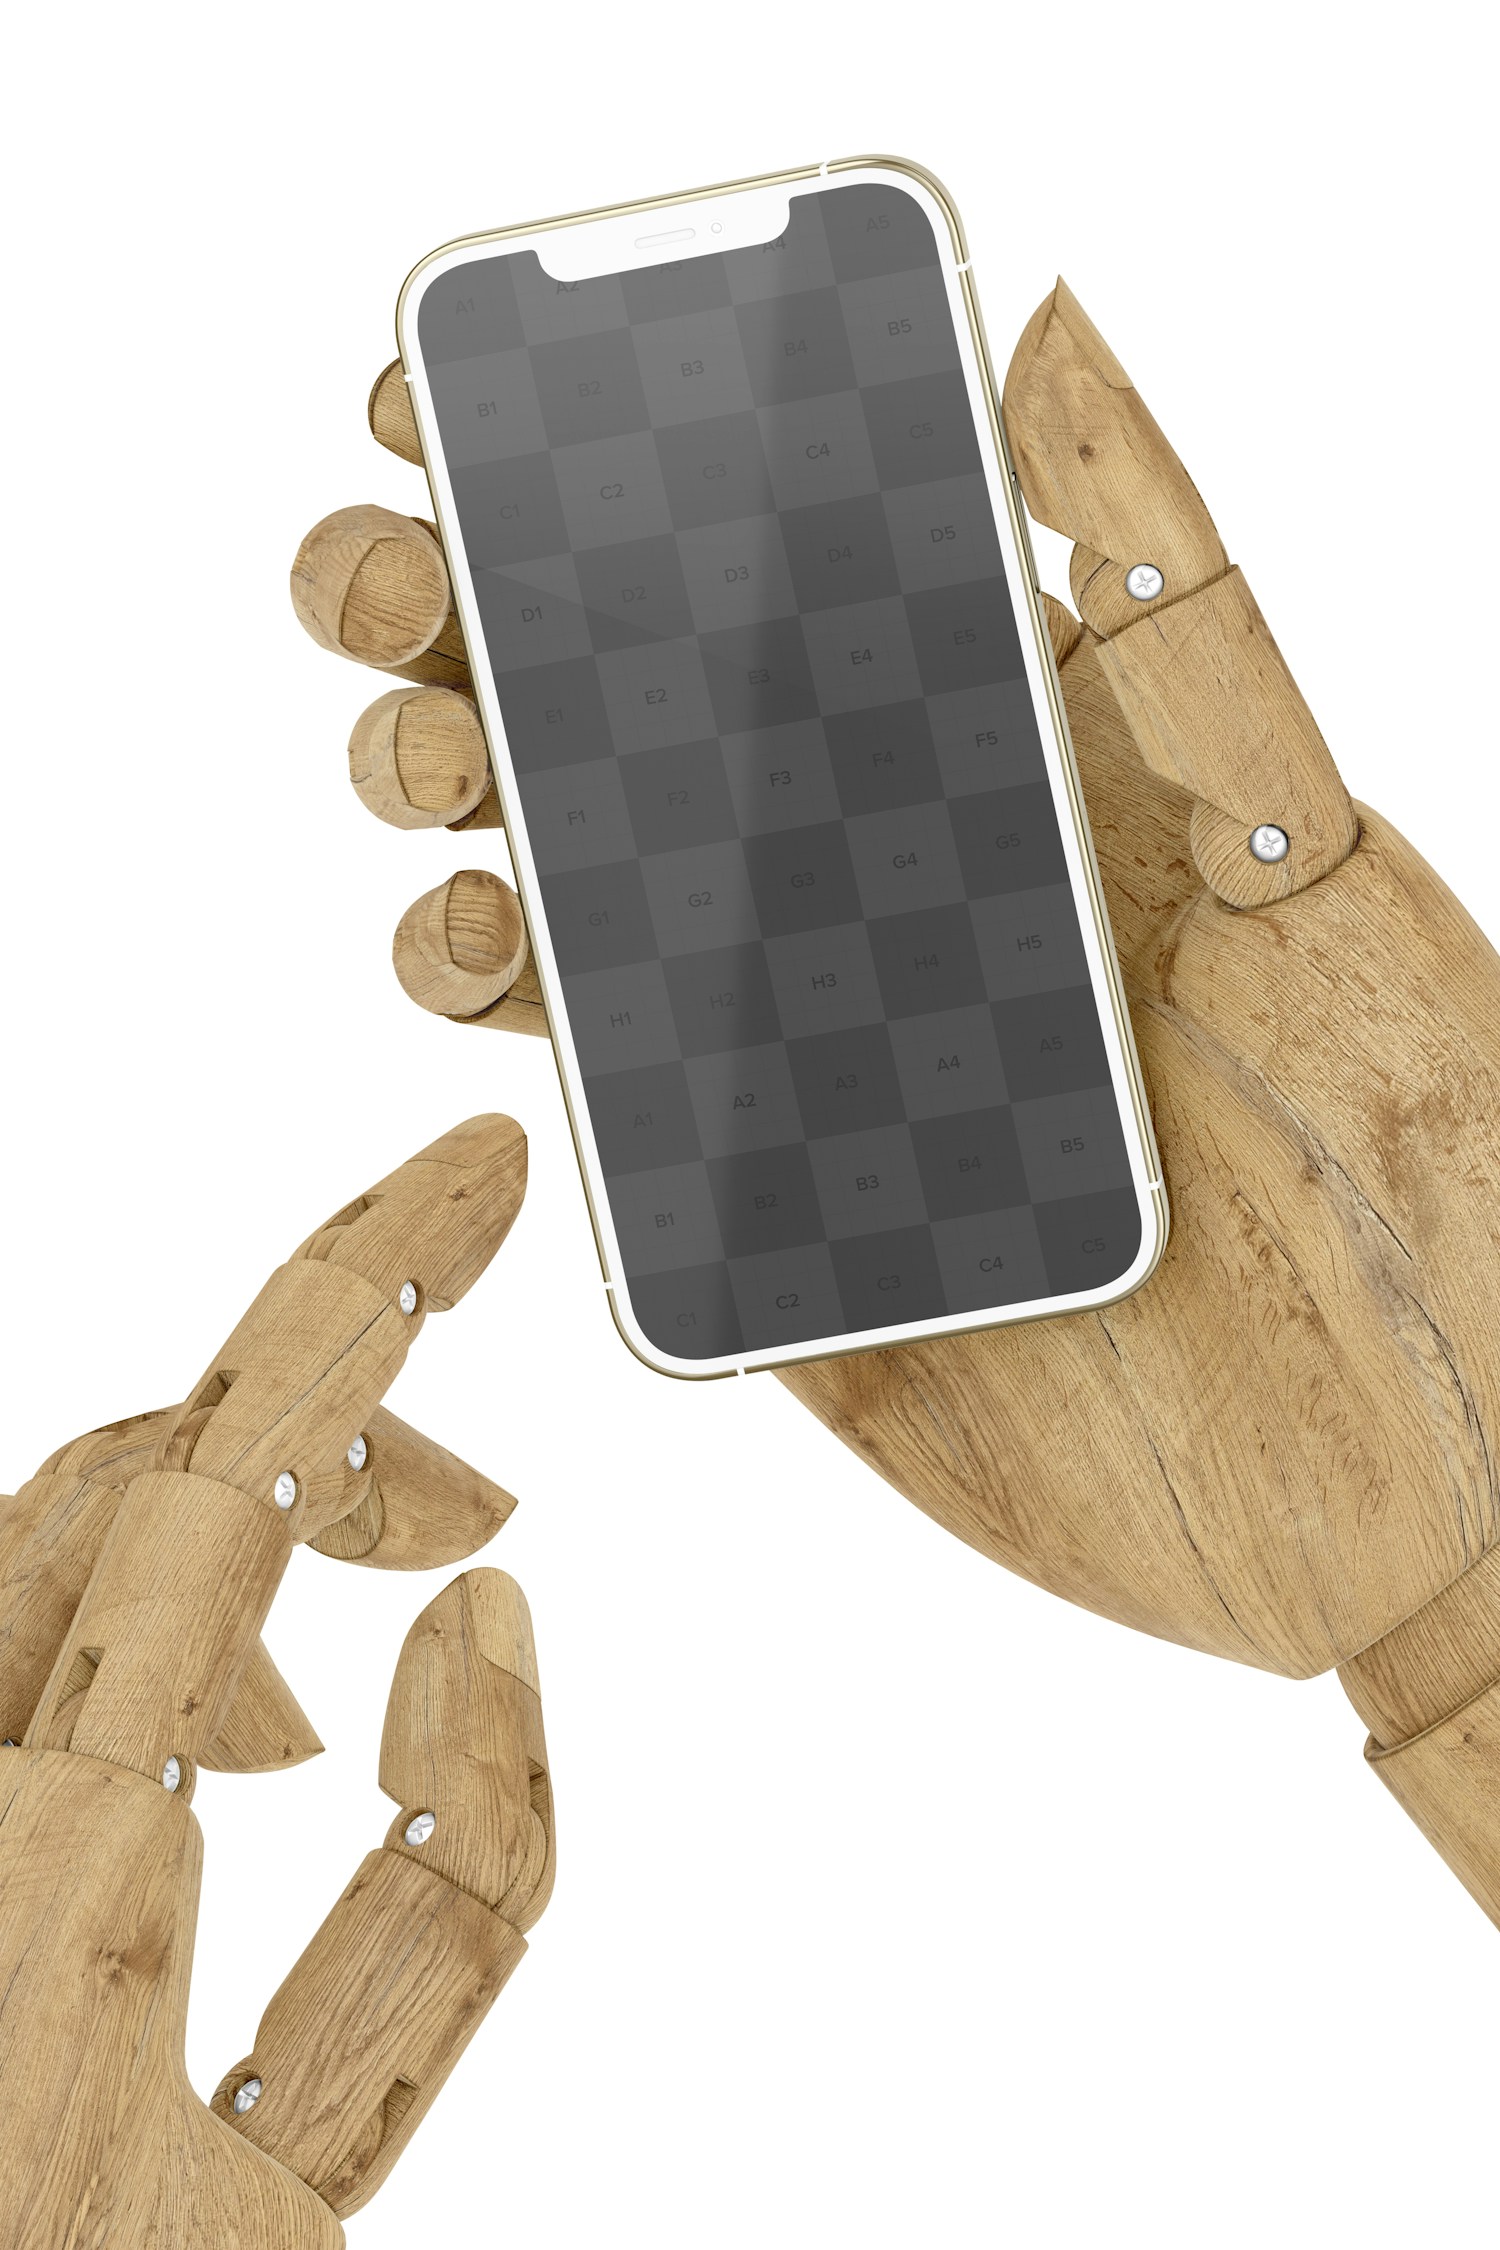 Smartphone with Hands Mockup